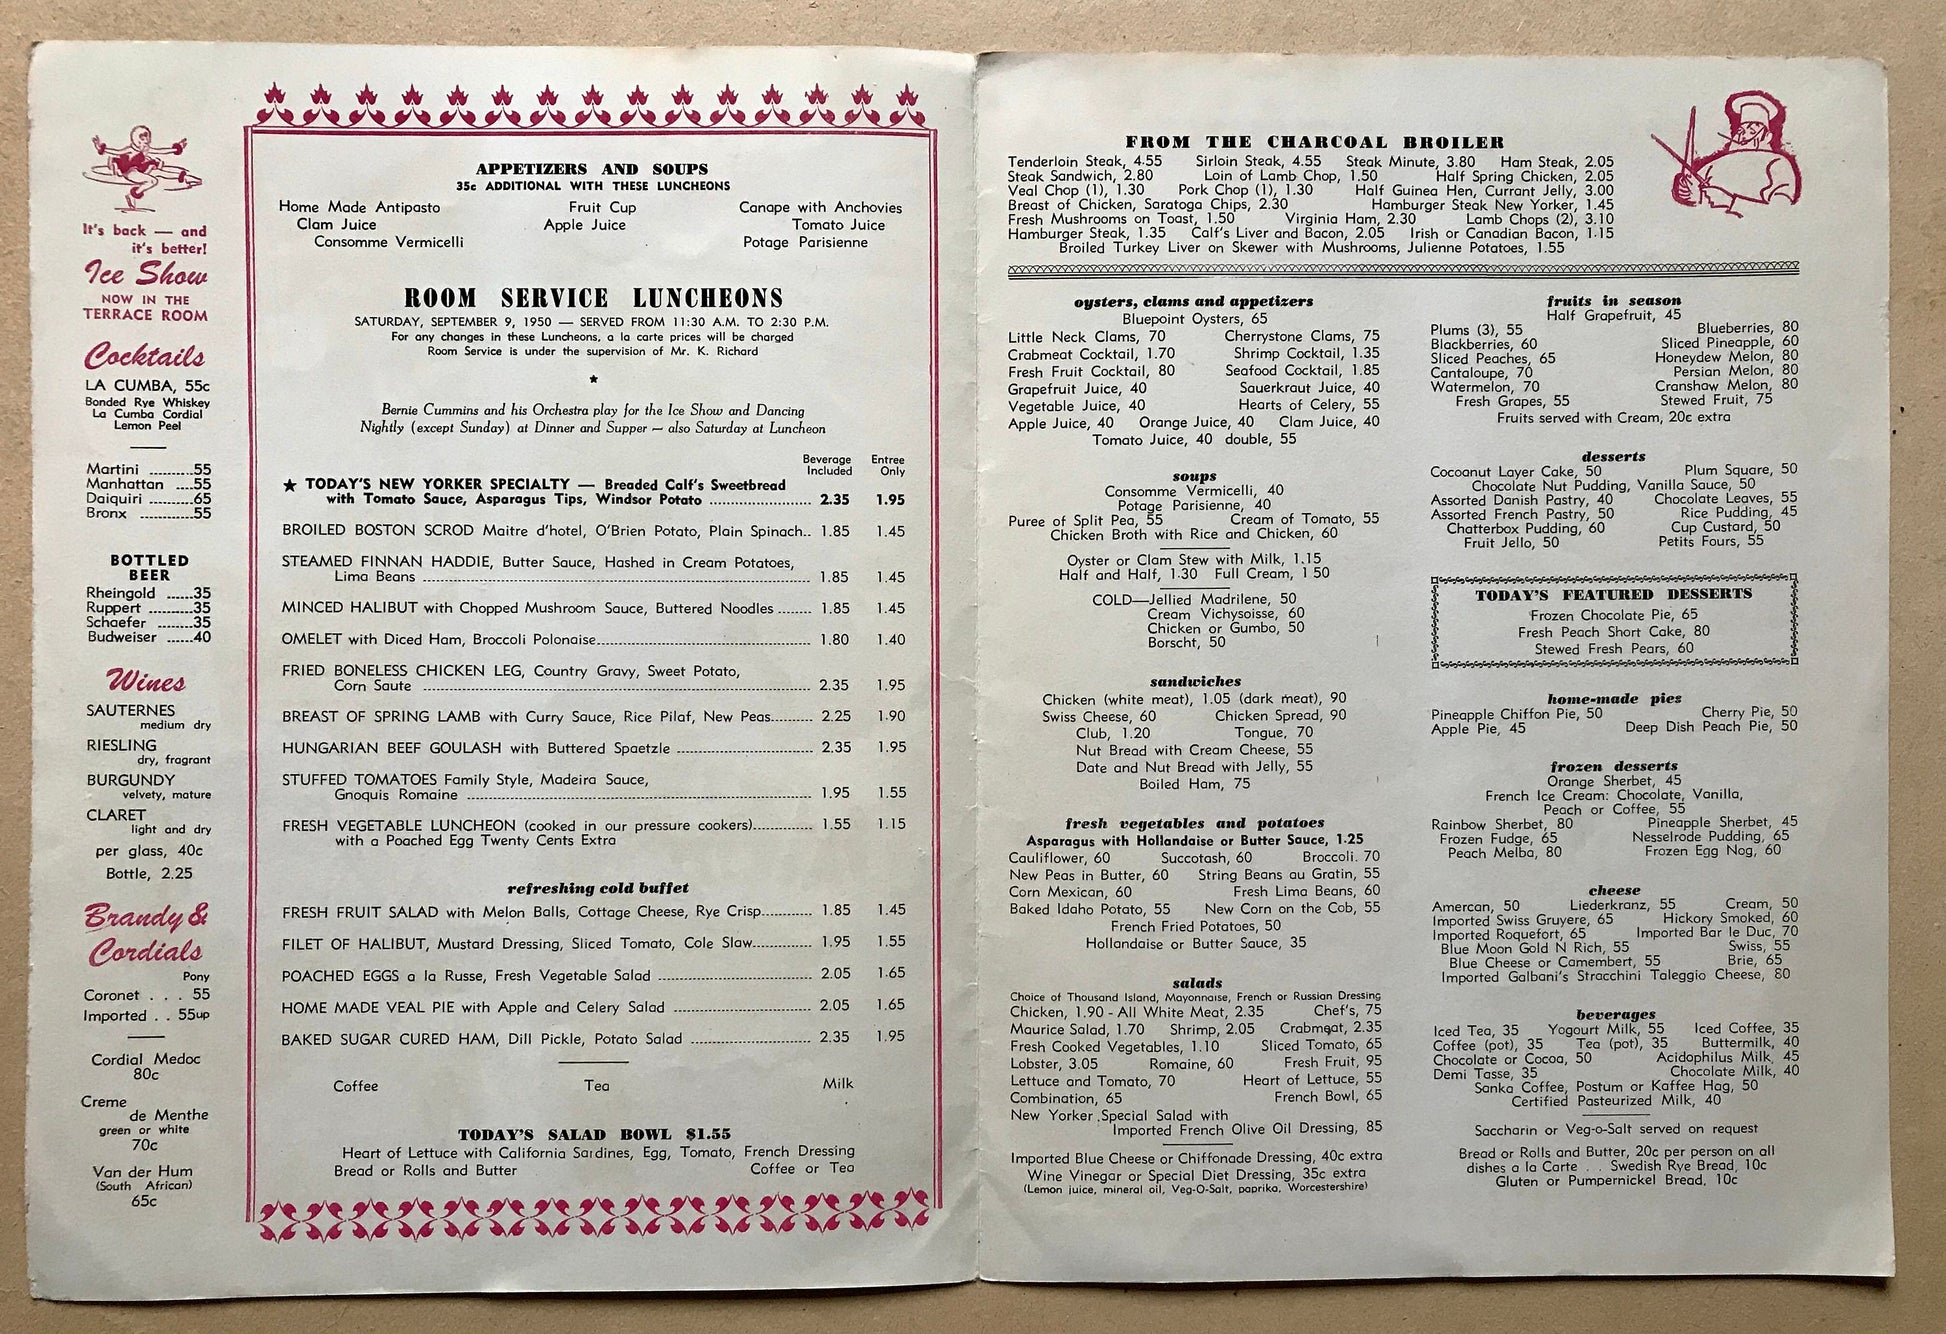 4 Original Menus Presented To Hotel Guests by The Hotel New Yorker in 1950. Artwork by C. Scholtz. Size: 30.5 x 23 cms.